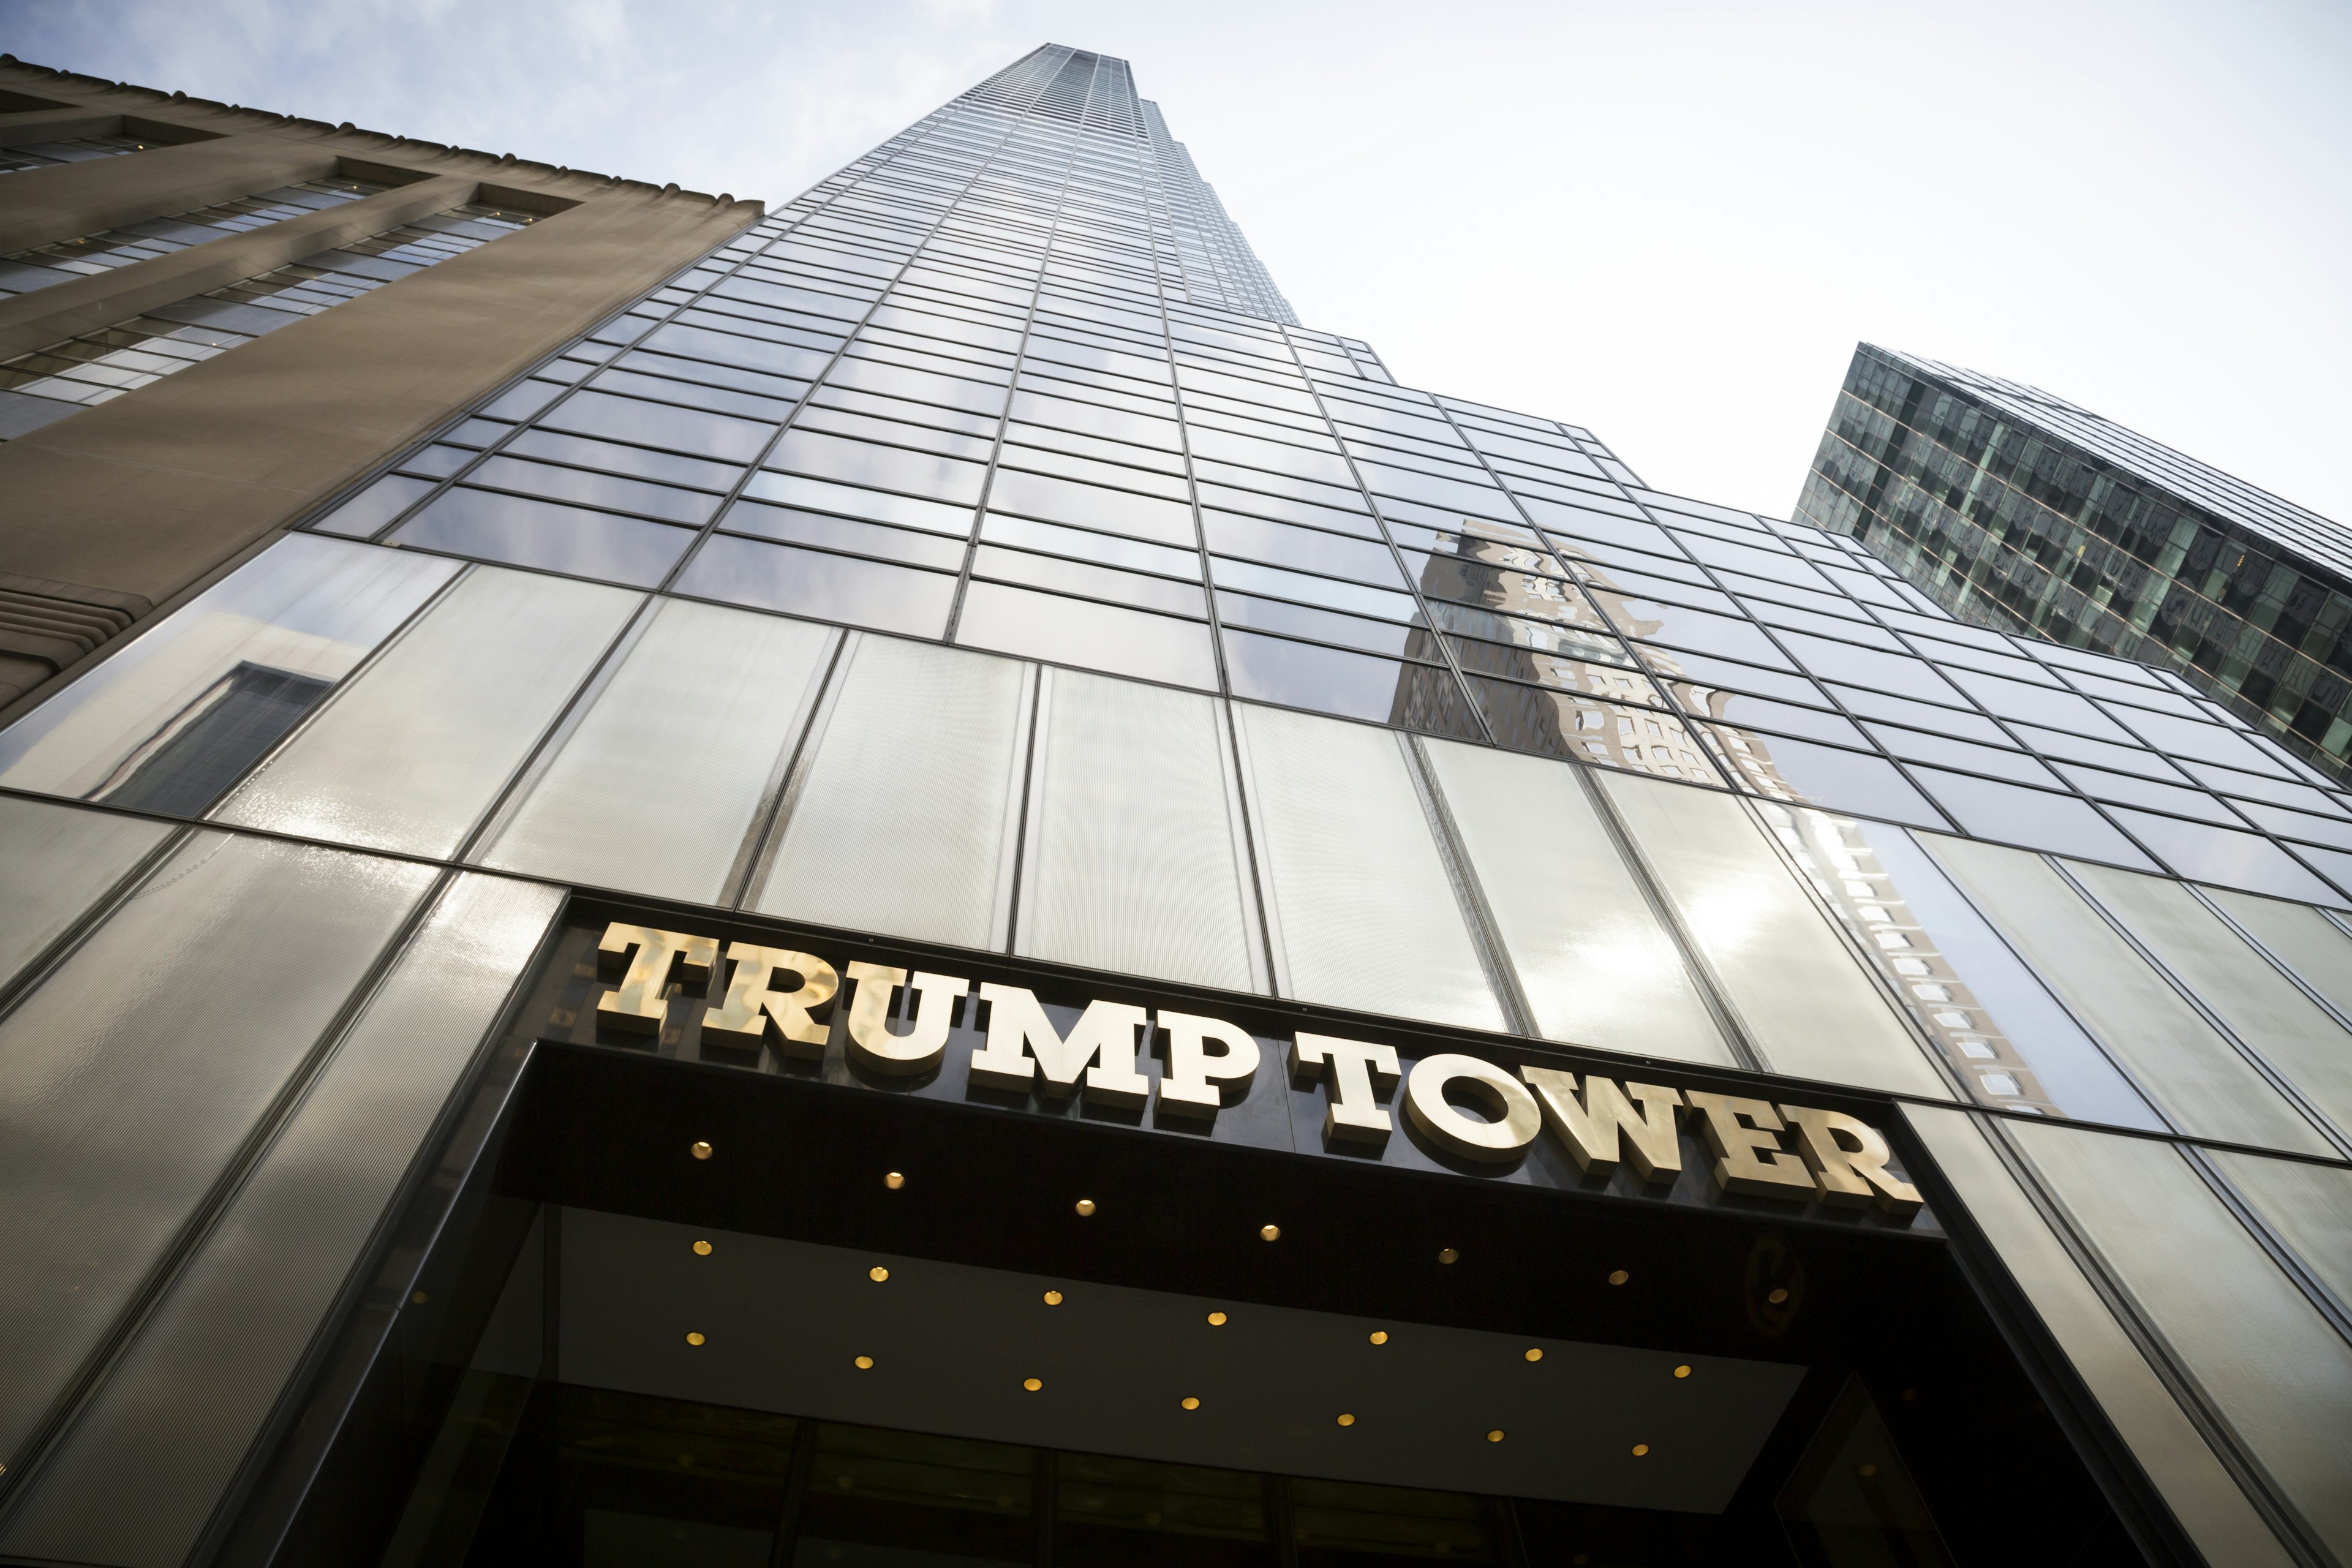 One of the tenants at Trump Tower in Manhattan is state-owned bank ICBC. This has been cited as one of Donald Trump's conflicts of interest in relation to China. (Glynnis Jones/Shutterstock)